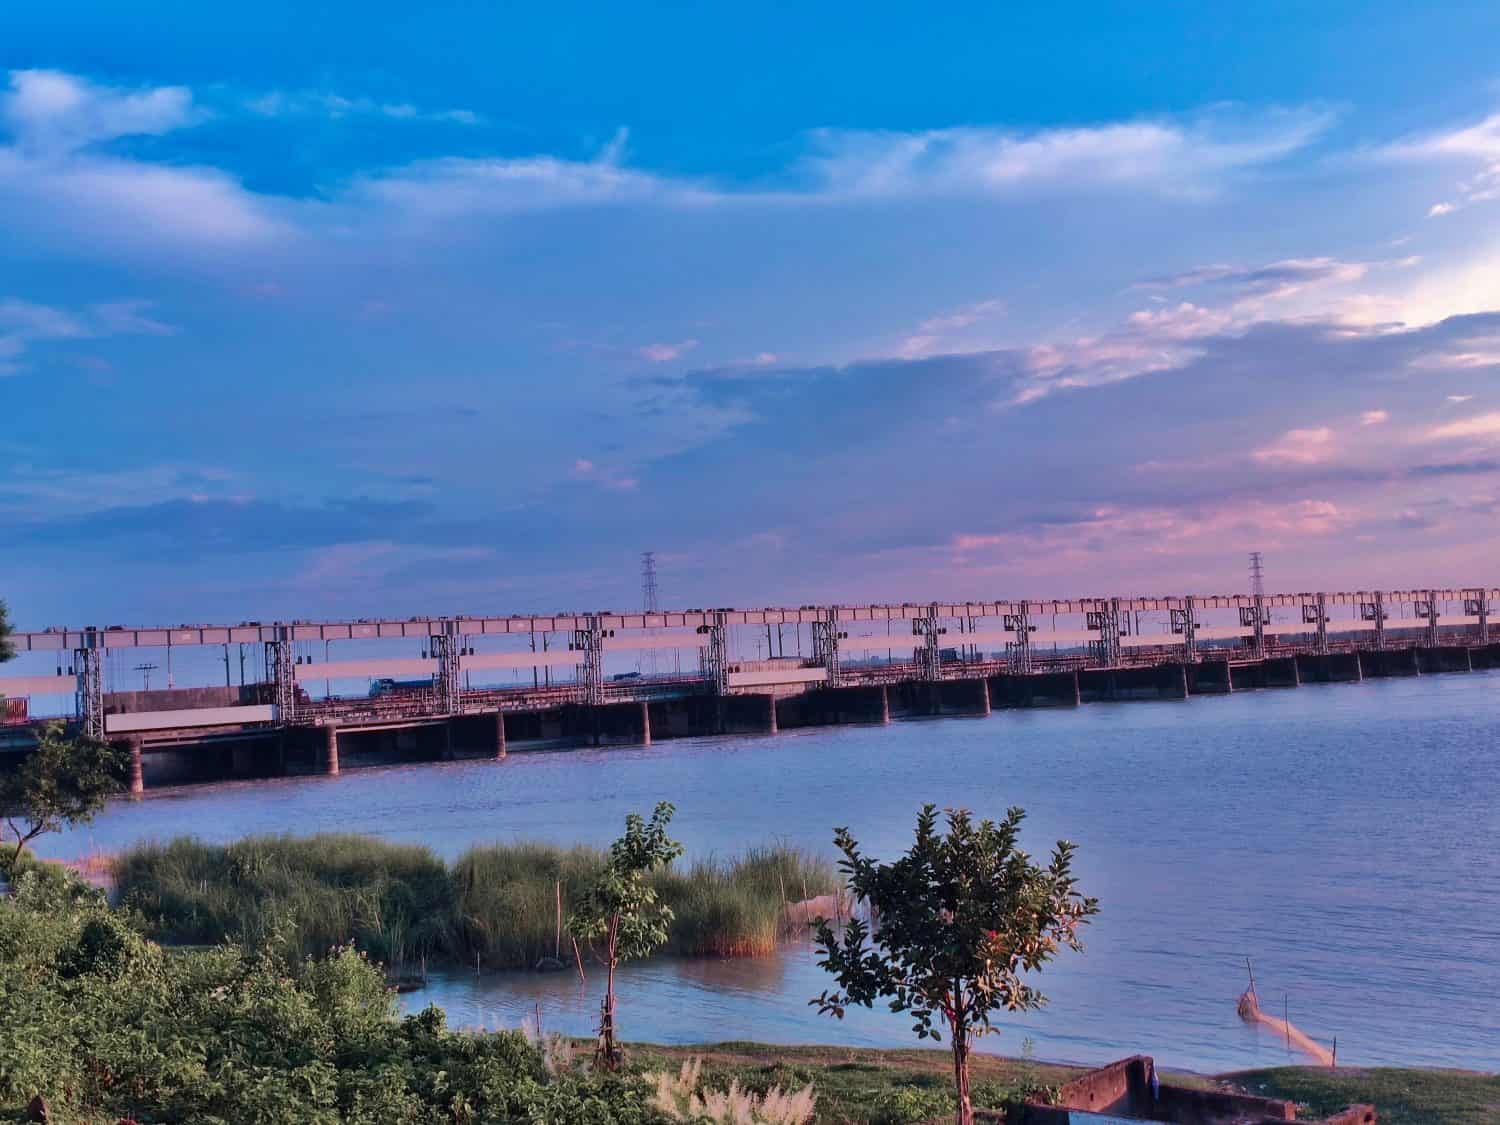  the Farakka barrage started in 1962, was completed in 1970 at a cost of $208 million. Operations began on 21 April 1975. The barrage is about 2,304 metres (7,559 ft) long. The Feeder C